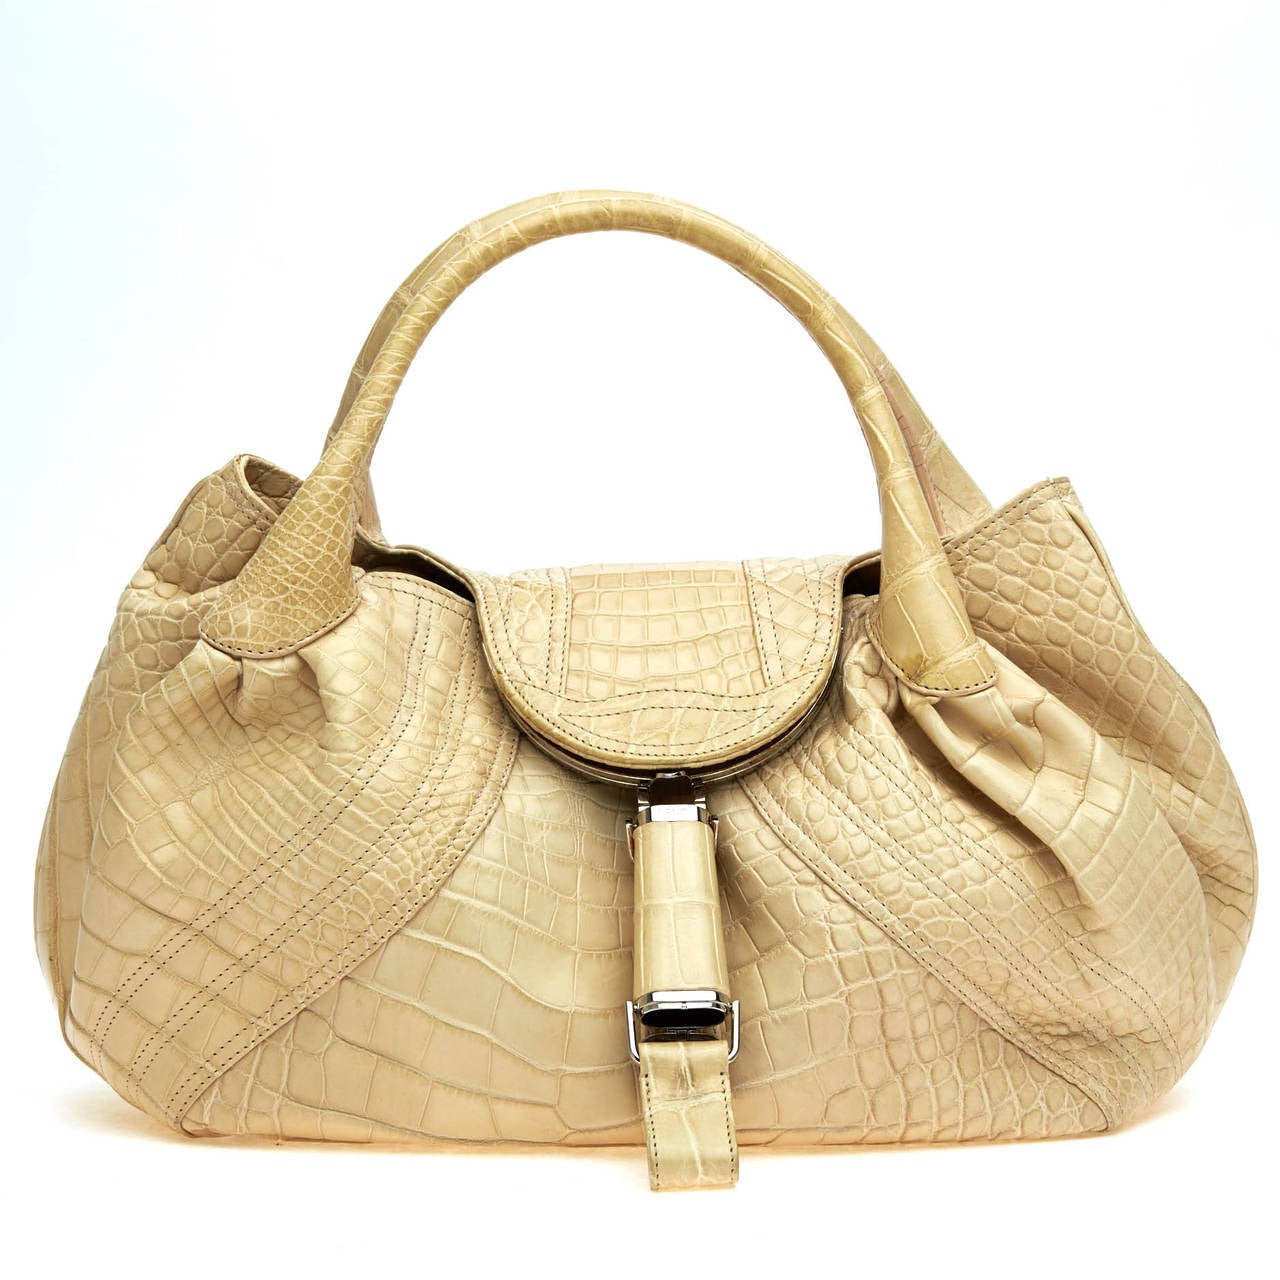 This unconventional Alligator Fendi Spy Bag is the ideal purchase for anyone who wants to make a bold statement. This beautifully crafted hobo, in a creme color, features a 